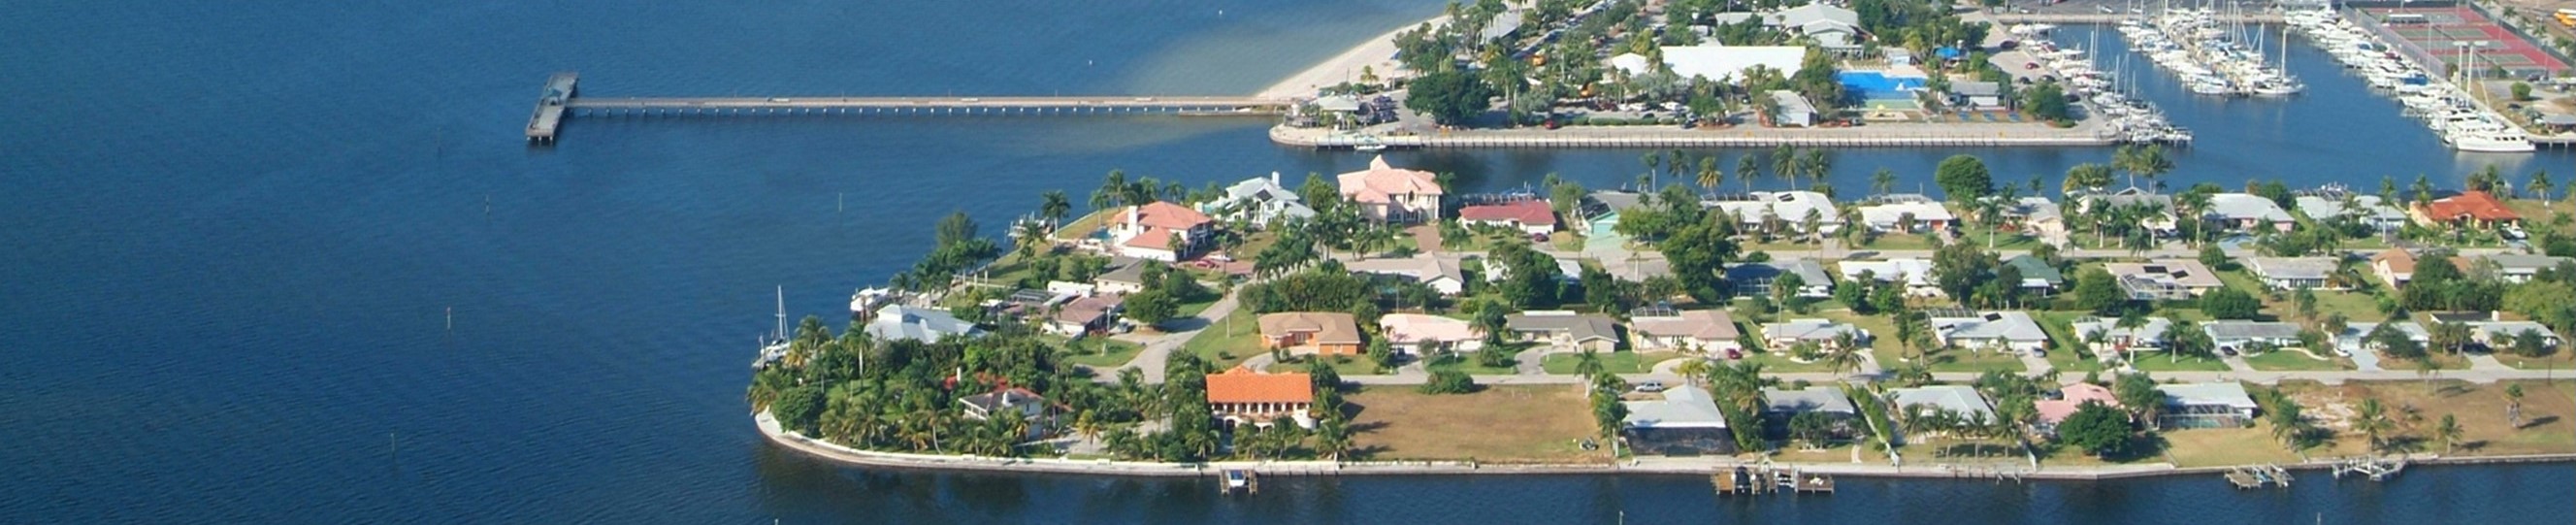 Picture of the Pier at the south tip of Cape Coral and the open water